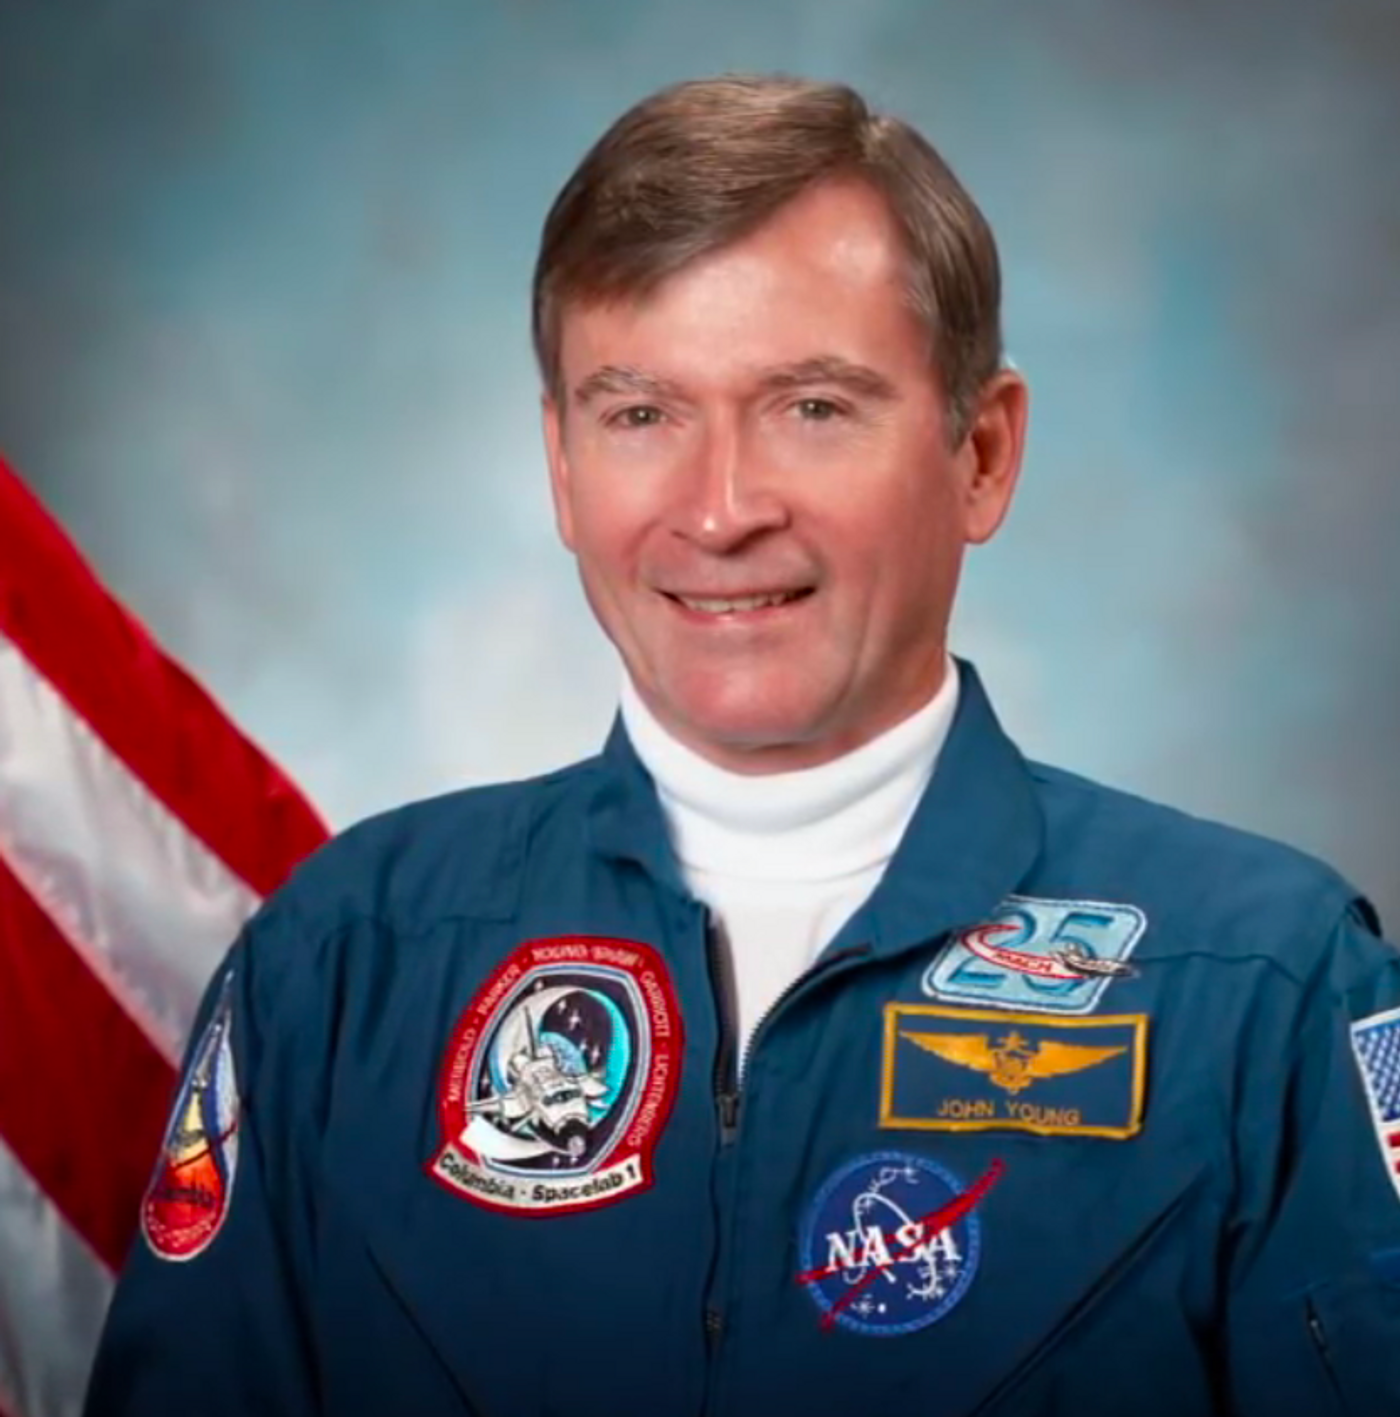 NASA astronaut John Young passed away at 87 years old on Friday.